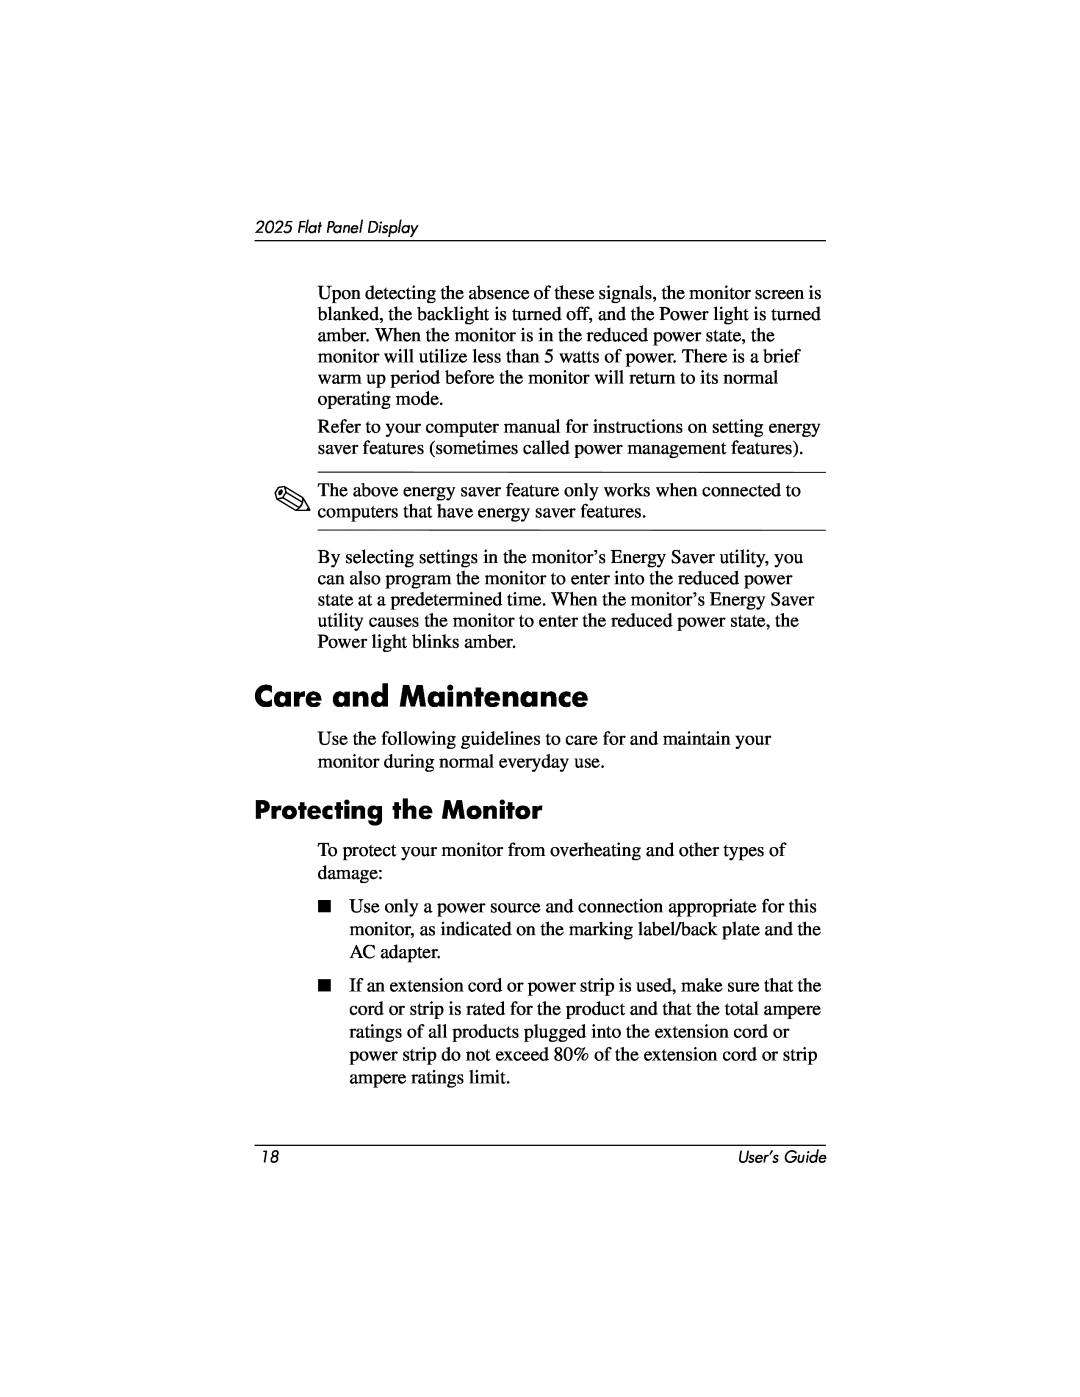 Compaq 2025 manual Care and Maintenance, Protecting the Monitor 